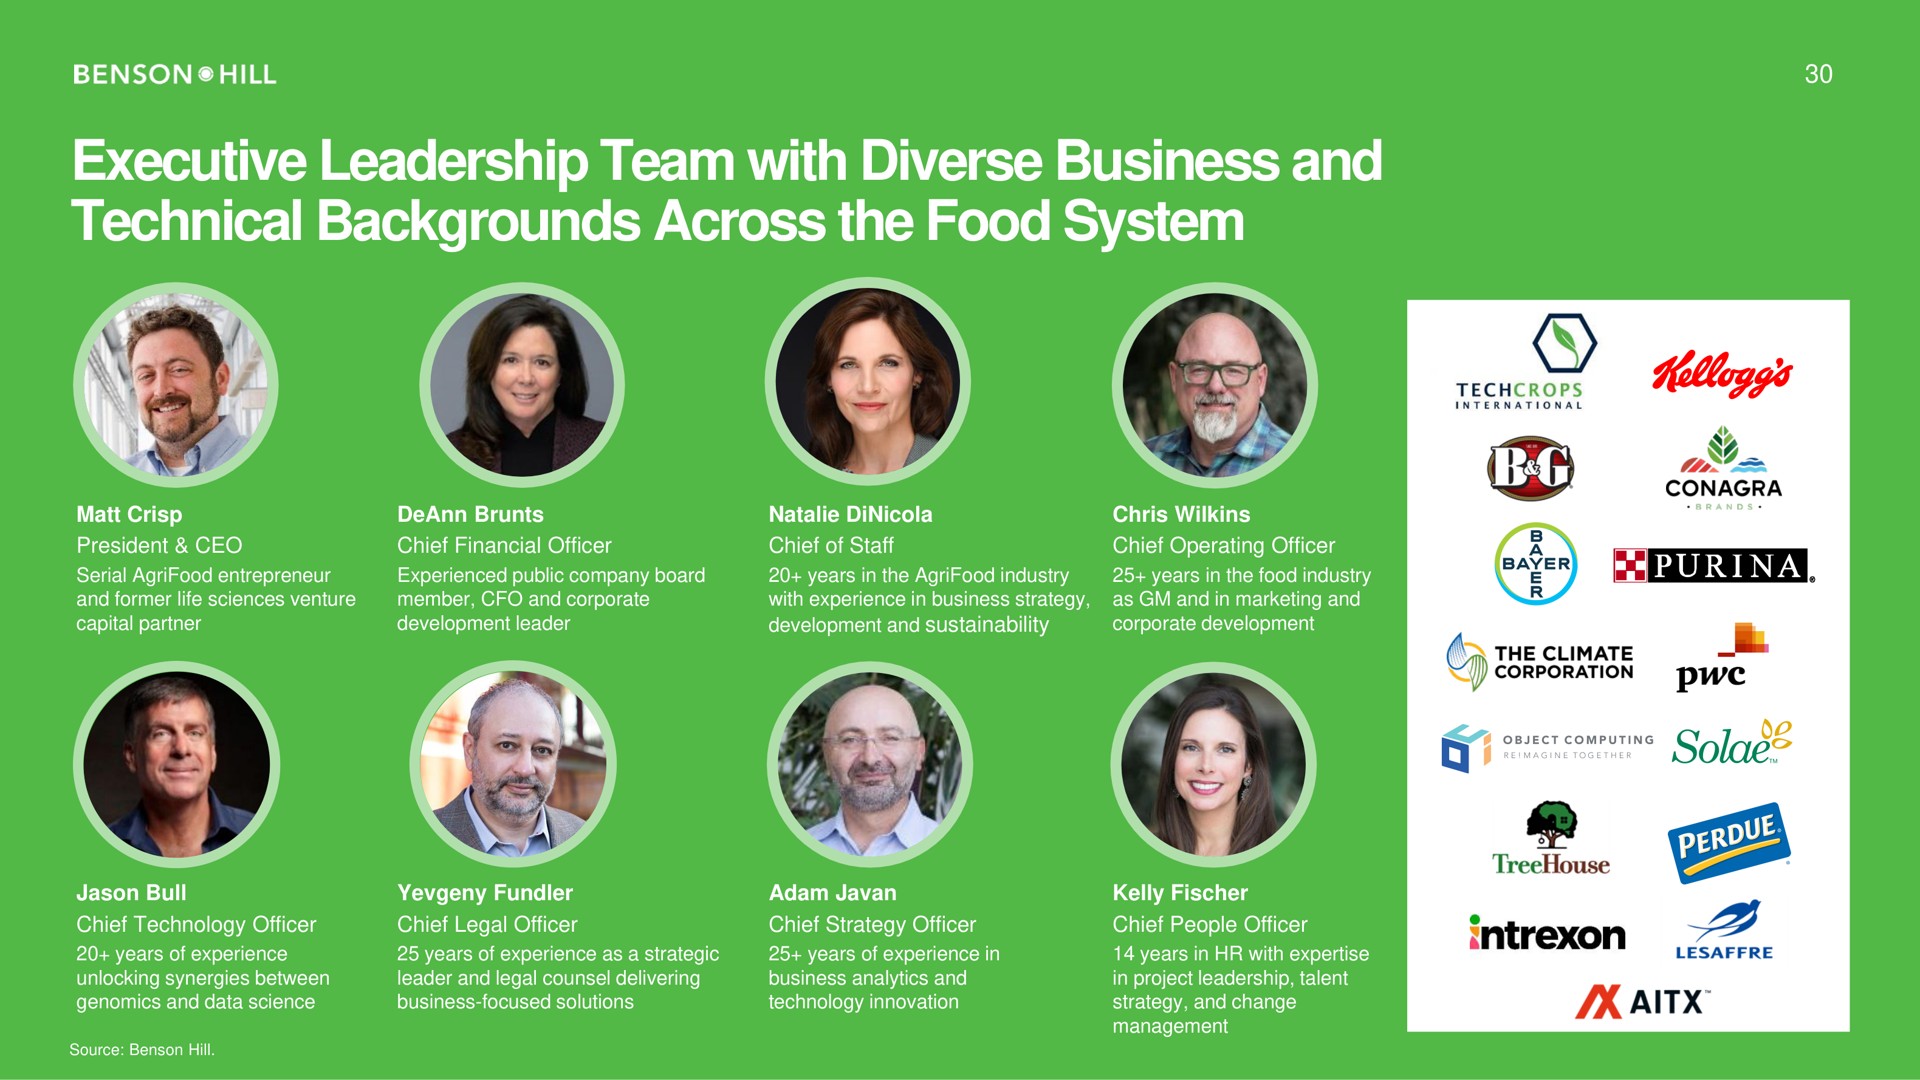 executive leadership team with diverse business and technical backgrounds across the food system suns | Benson Hill